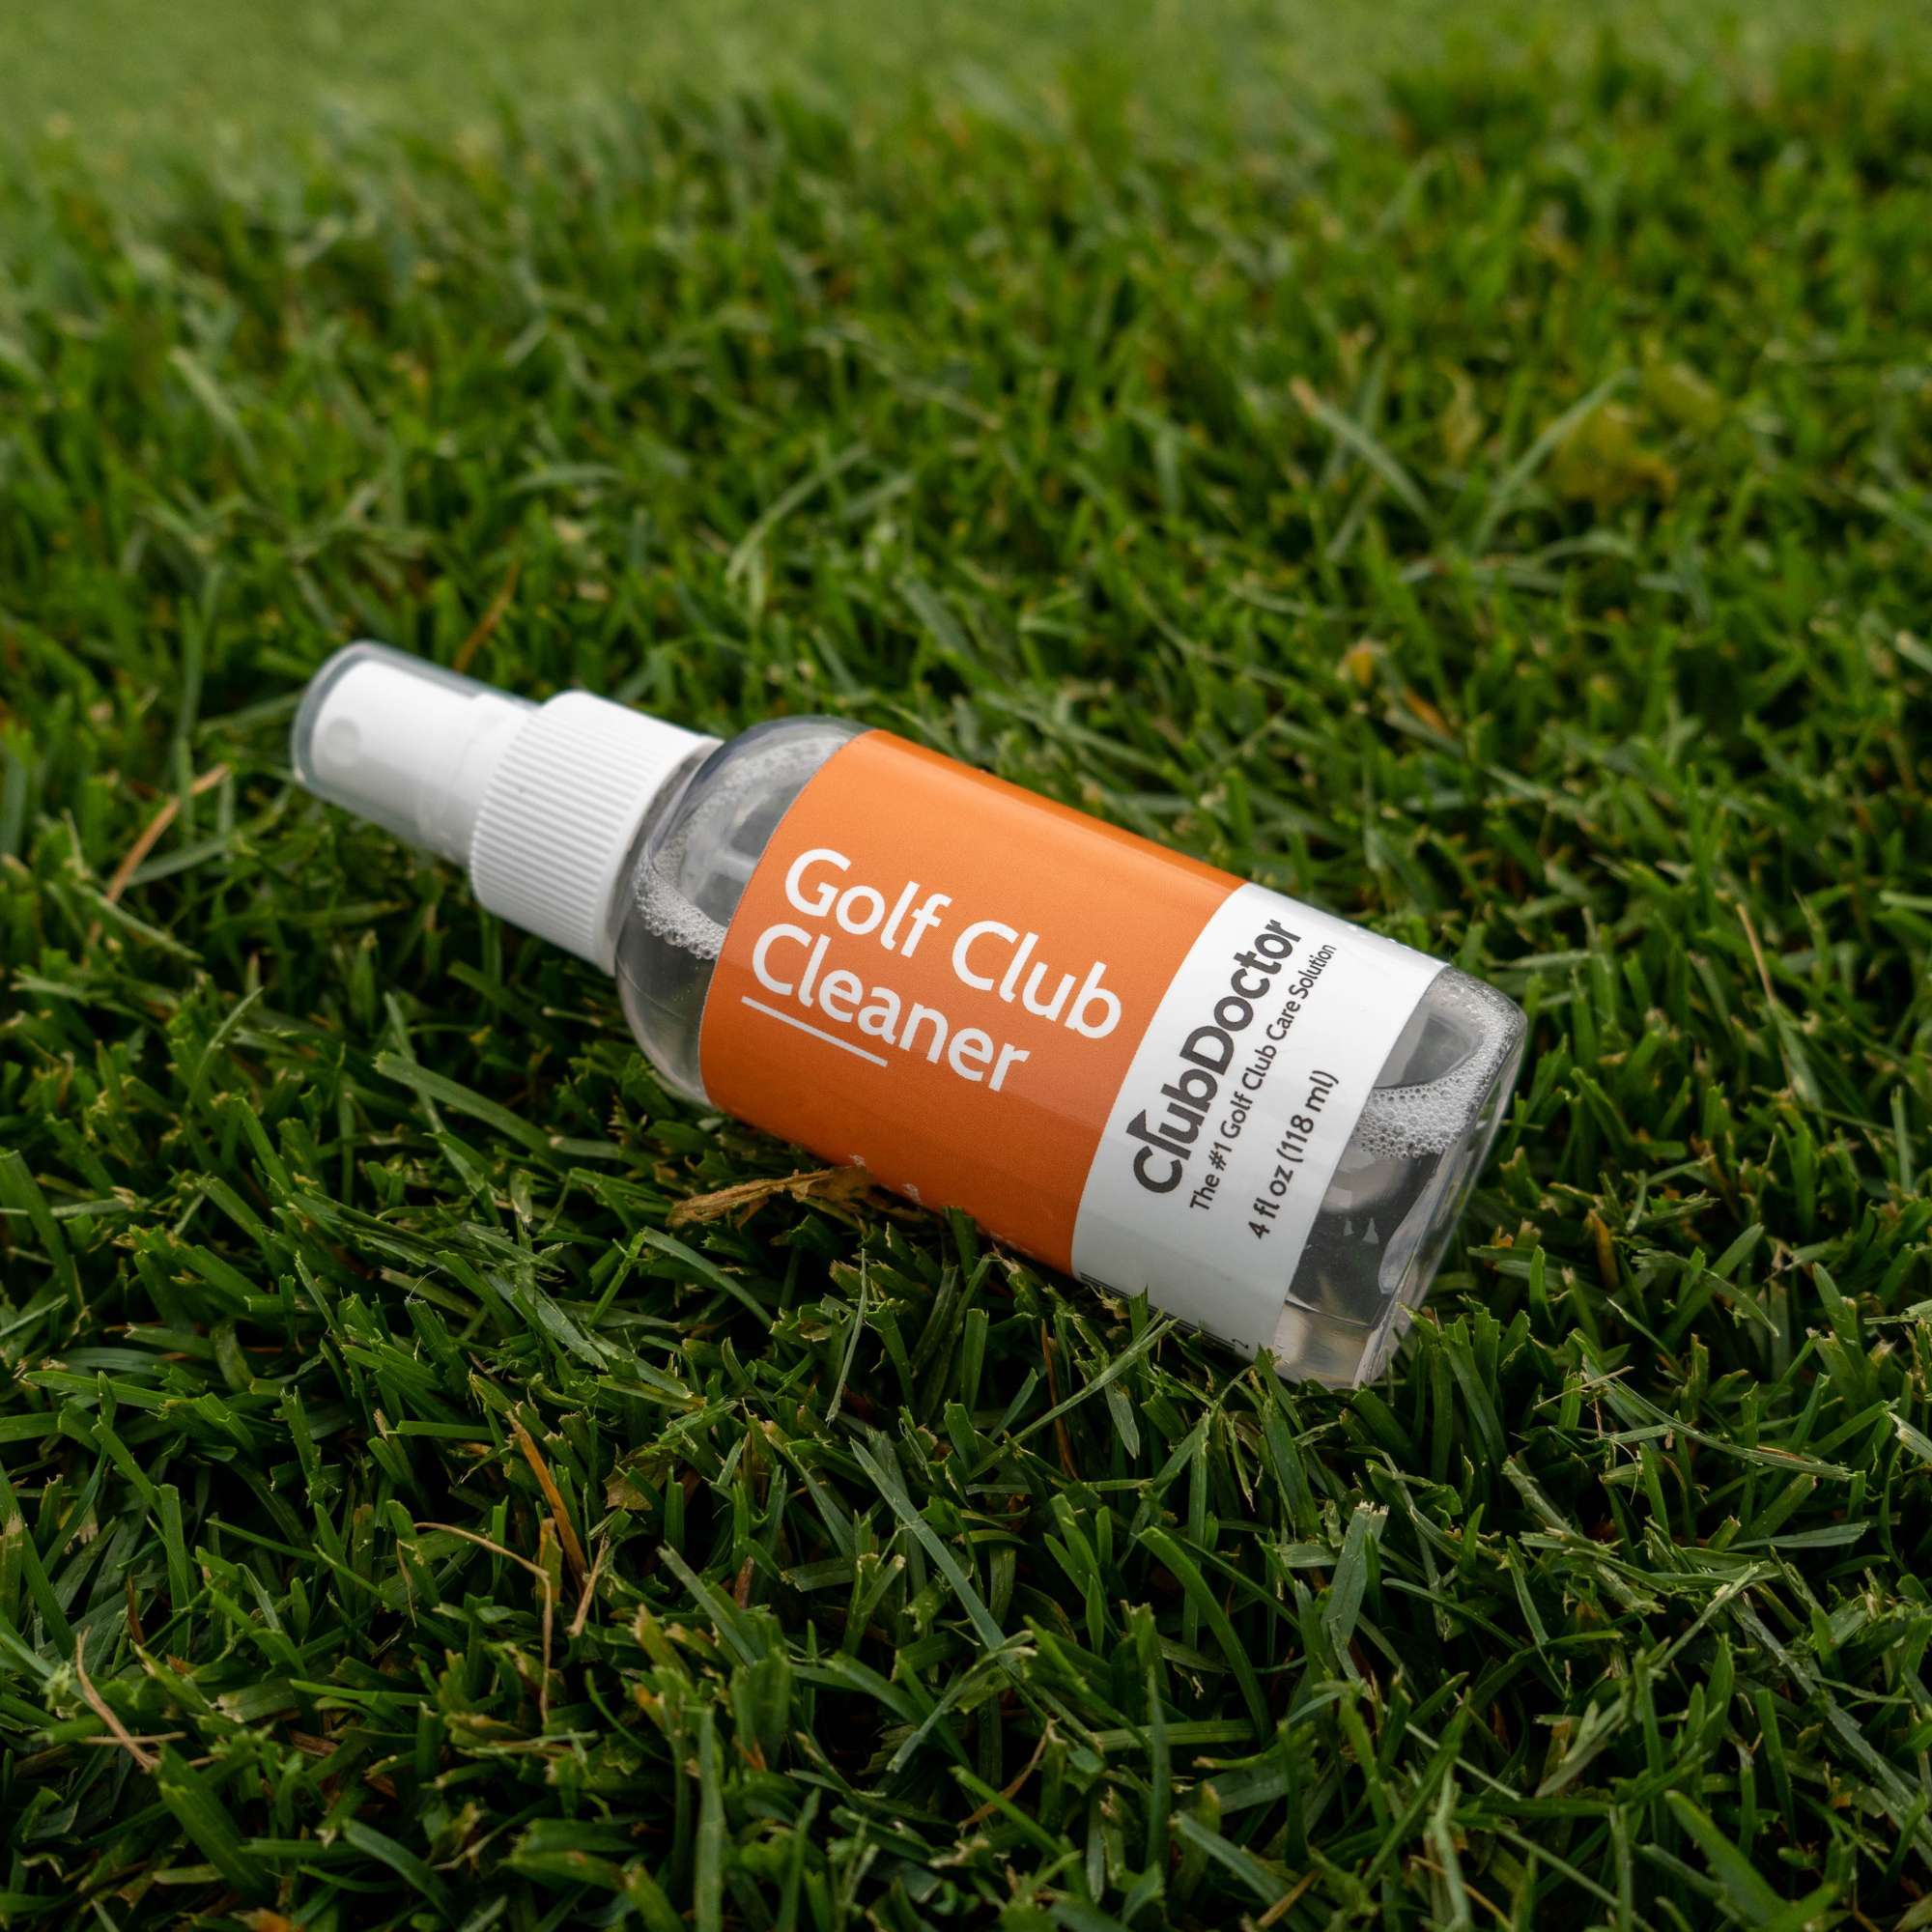 club doctor golf club cleaner bottle laying in the grass